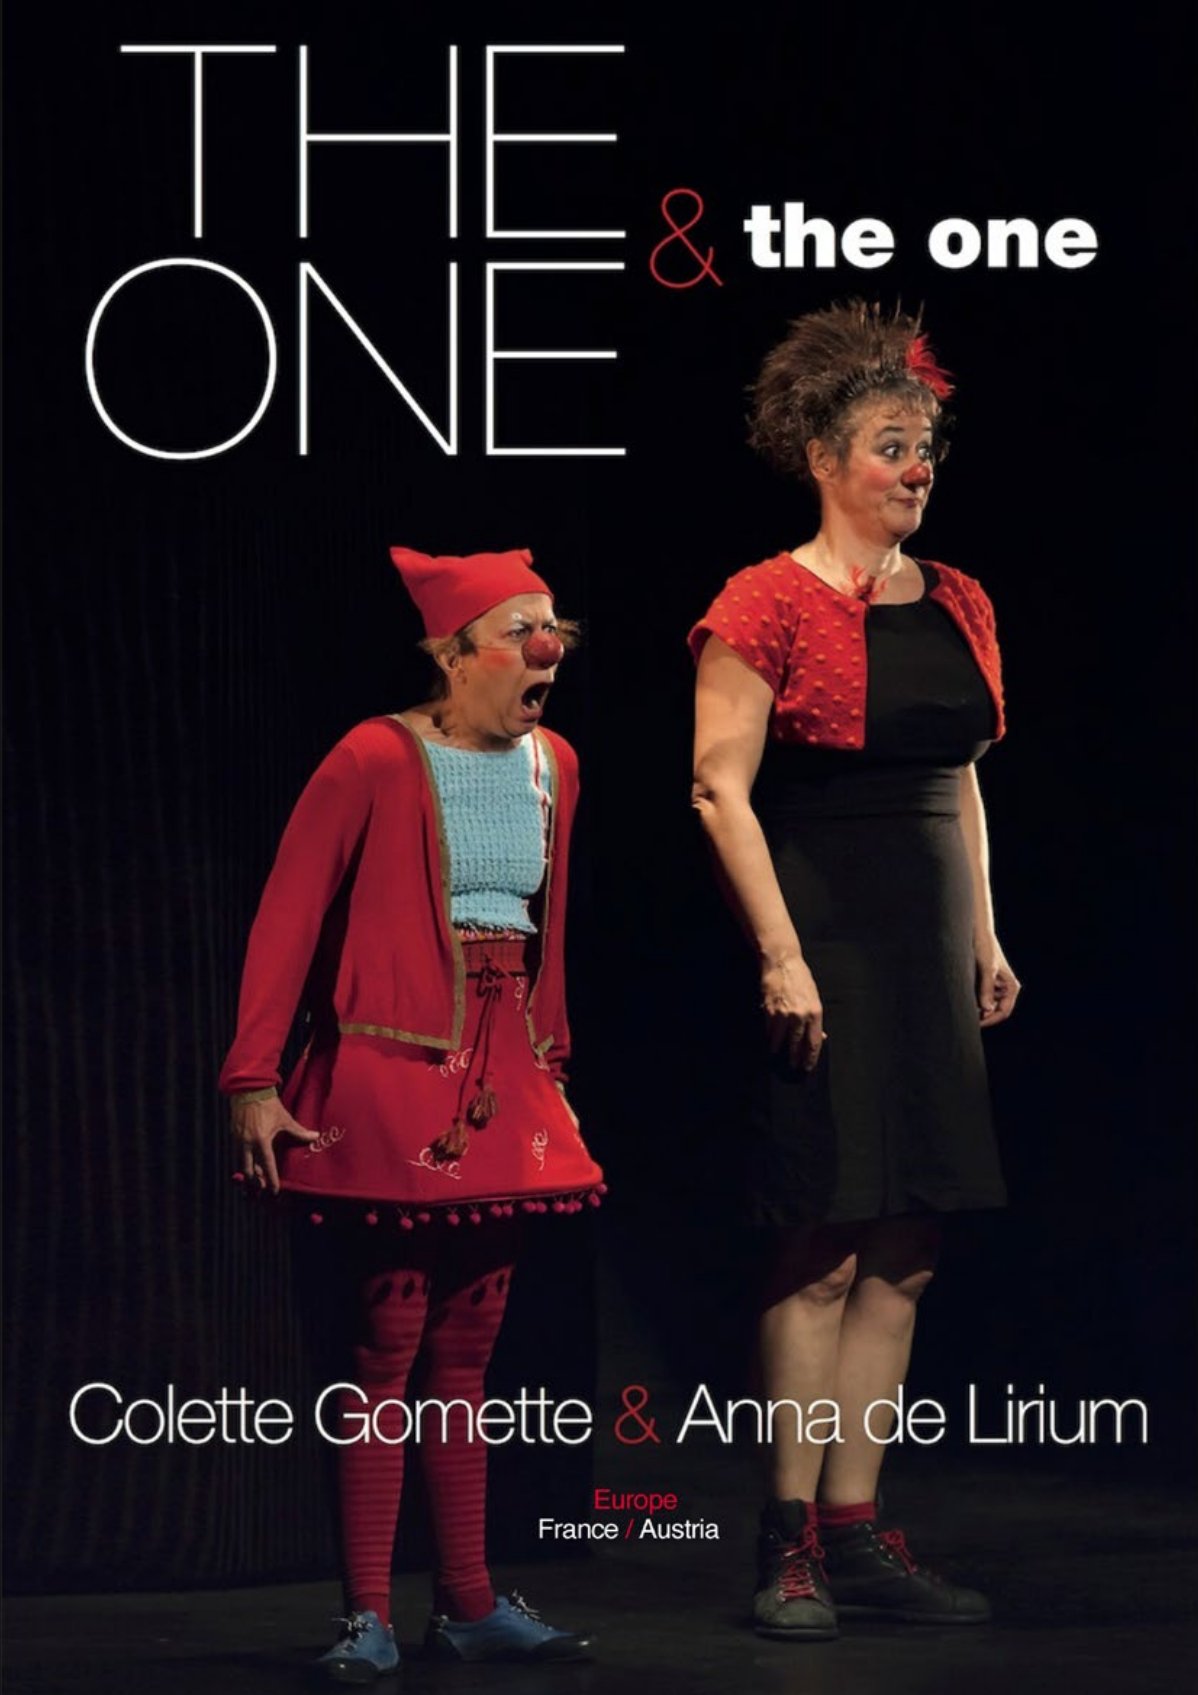 imagen #1: THE ONE & the one